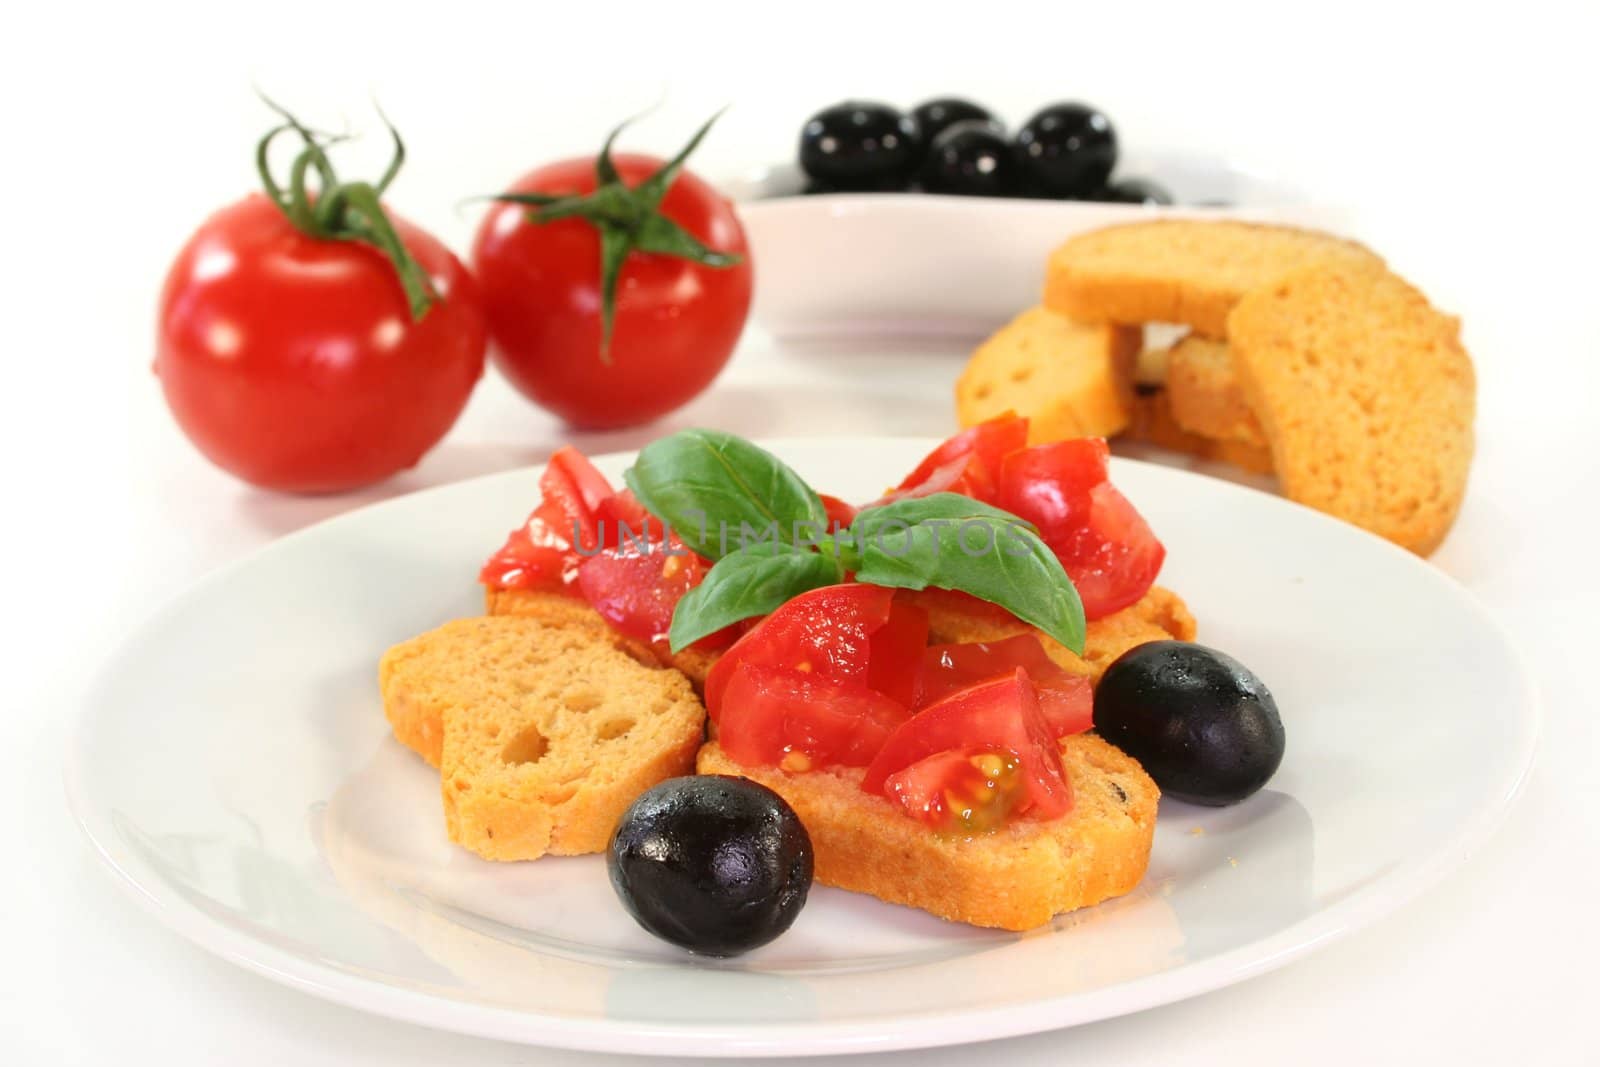 Bruschetta with tomatoes, olives and basil